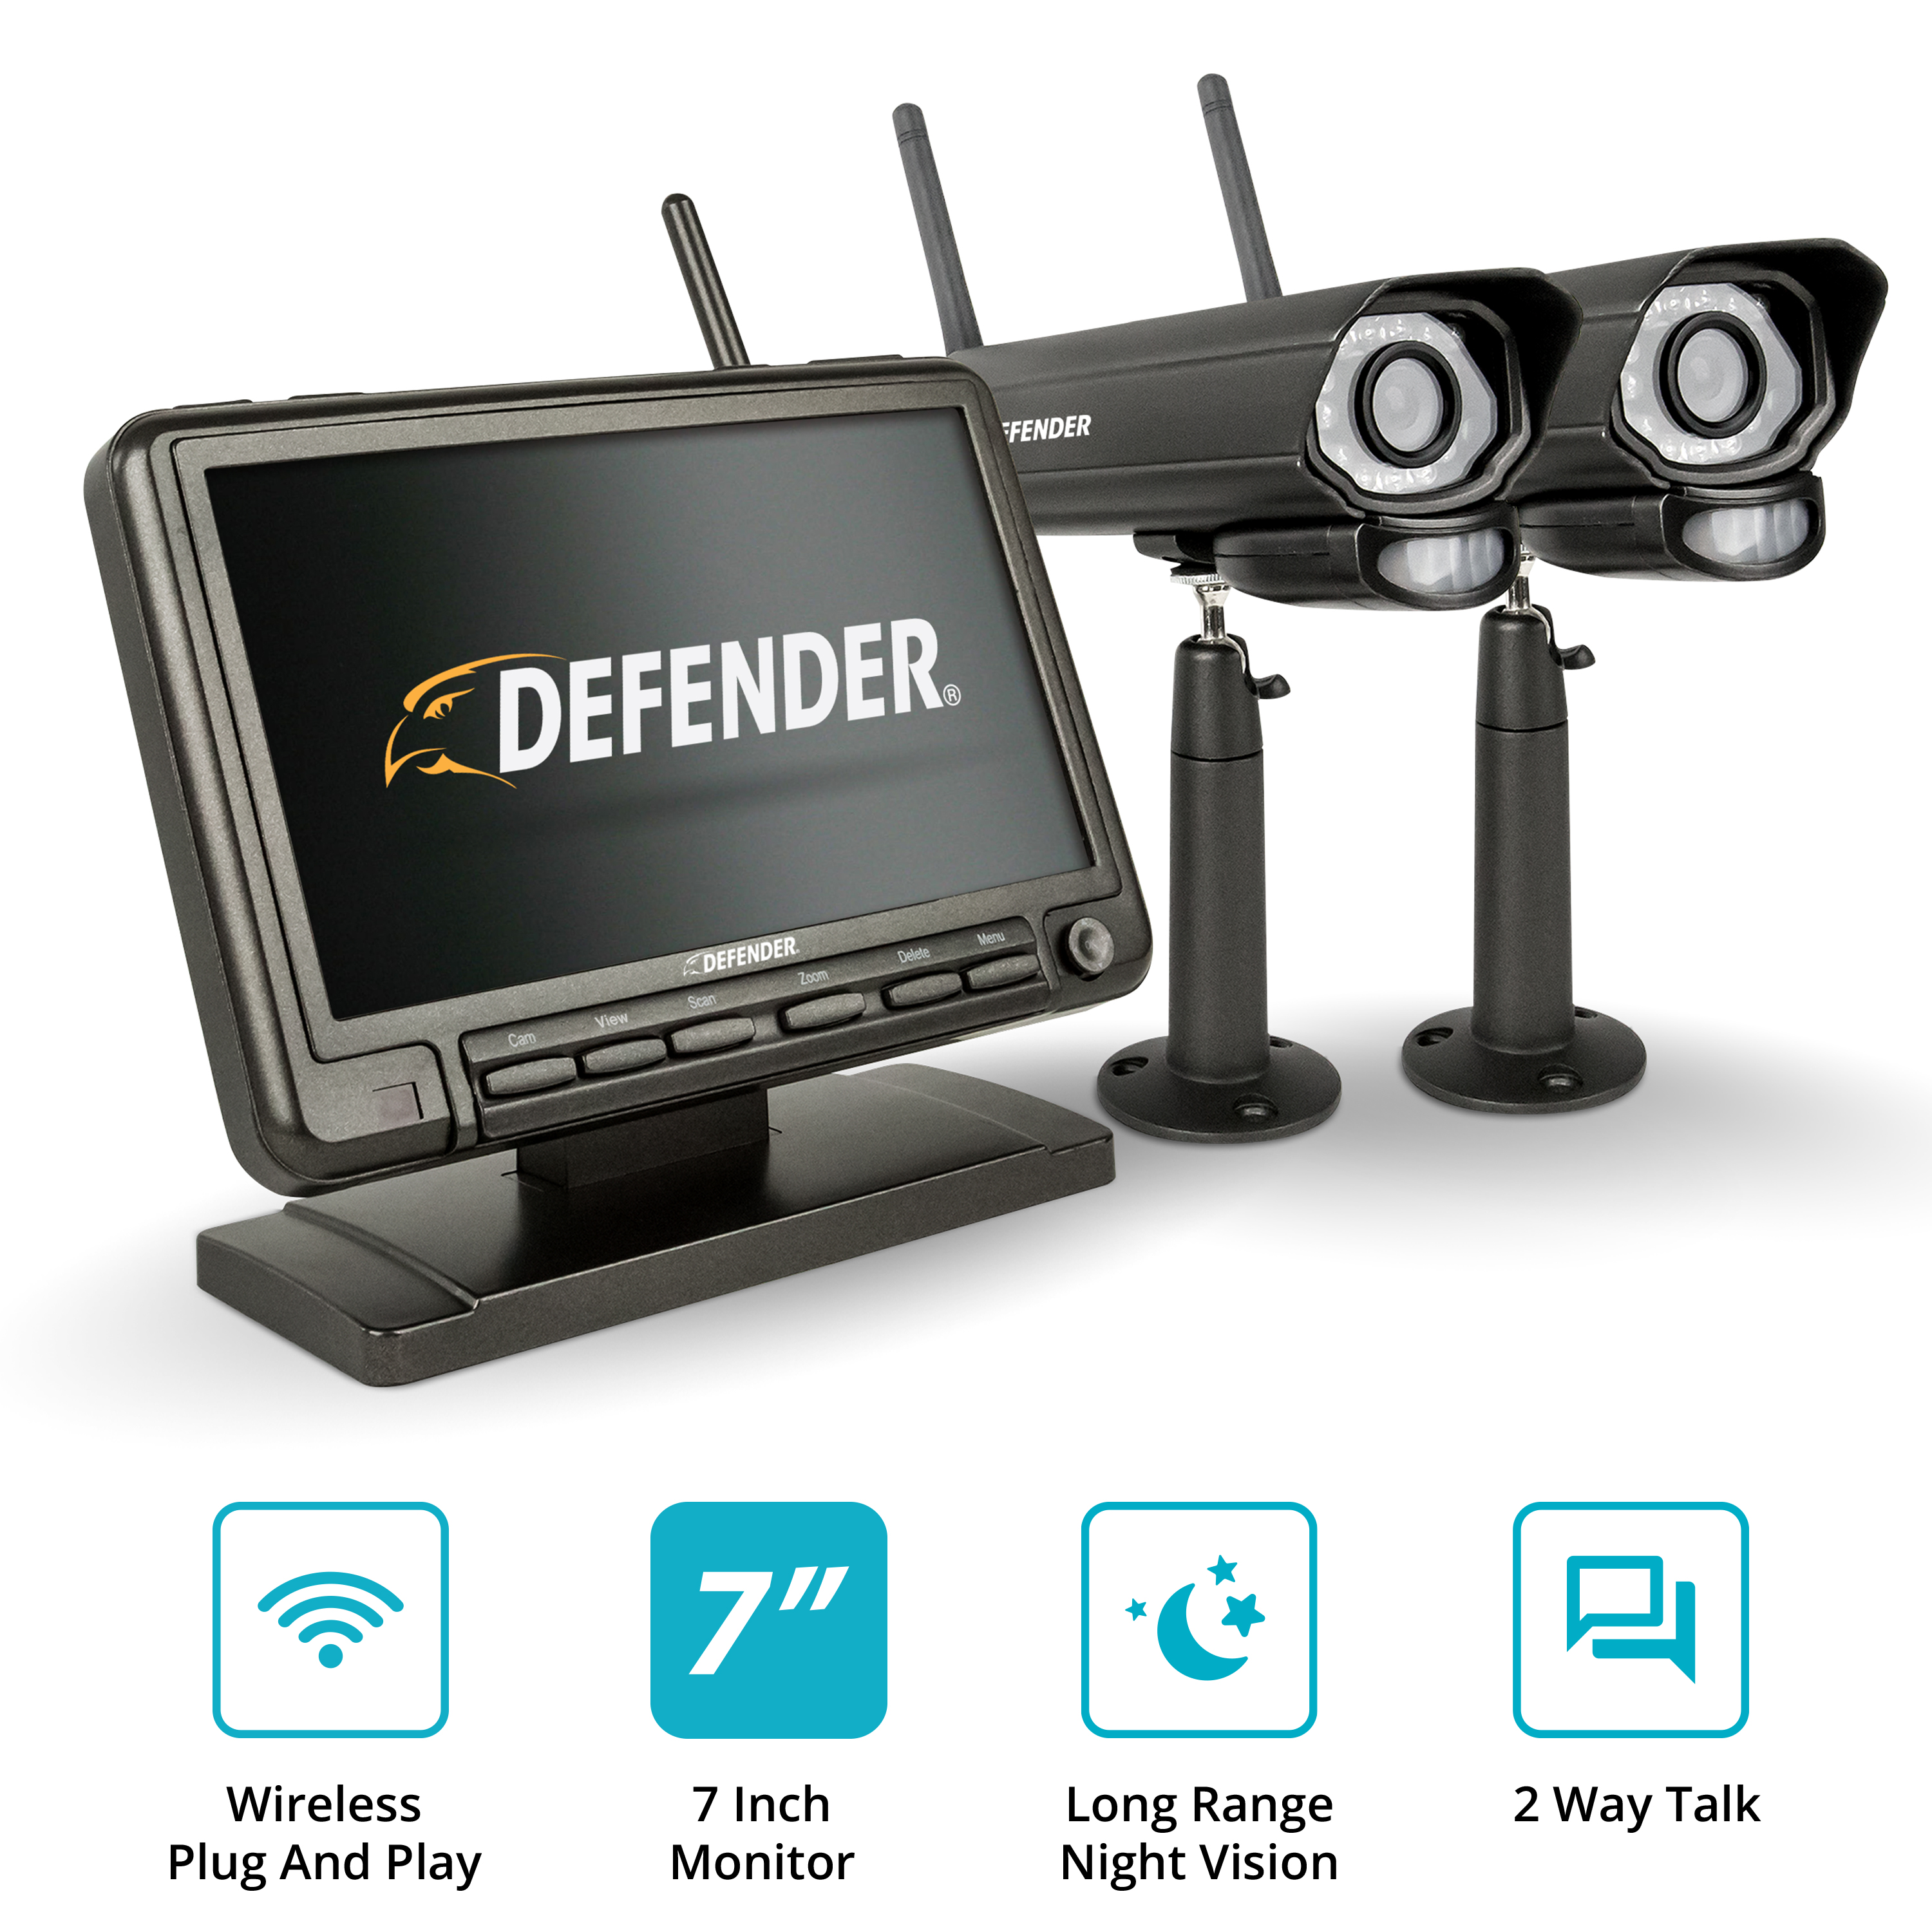 Defender PhoenixM2 Digital Wireless 7" Monitor DVR Security System with 2 Long-Range Night Vision Cameras and SD Card Recording - image 1 of 9